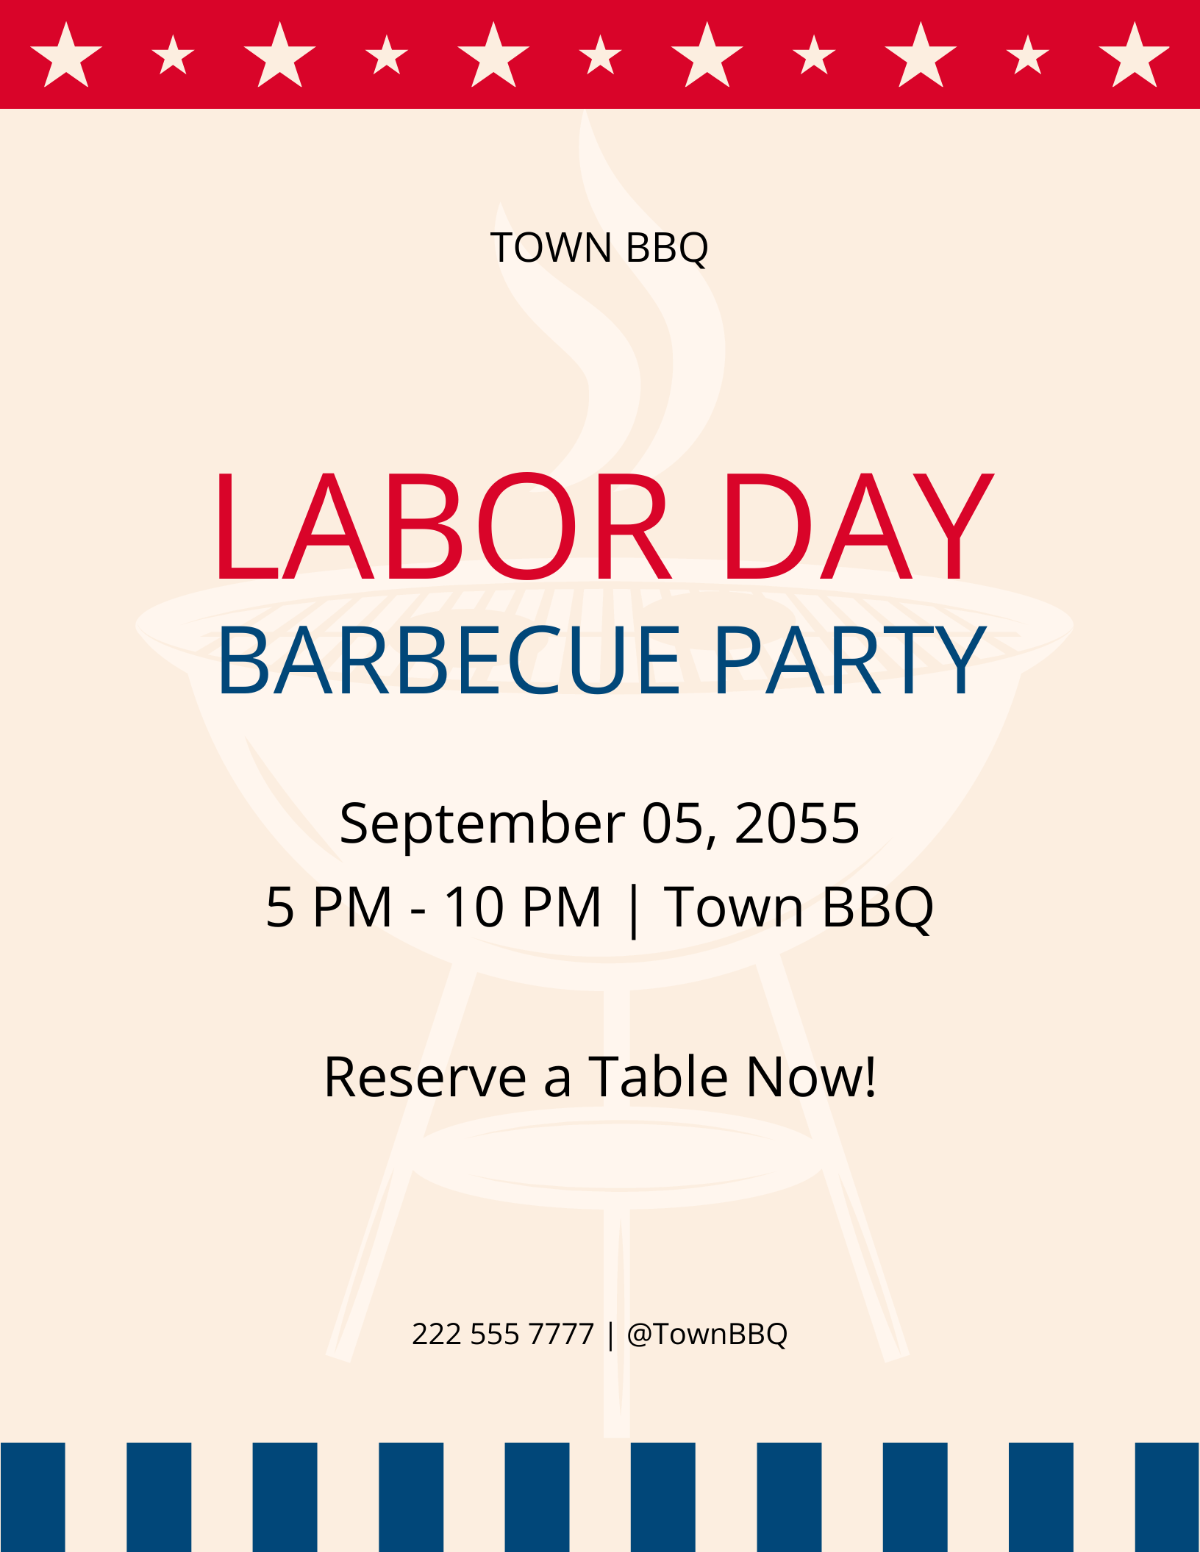 Free Labor Day Barbecue Party Flyer Template